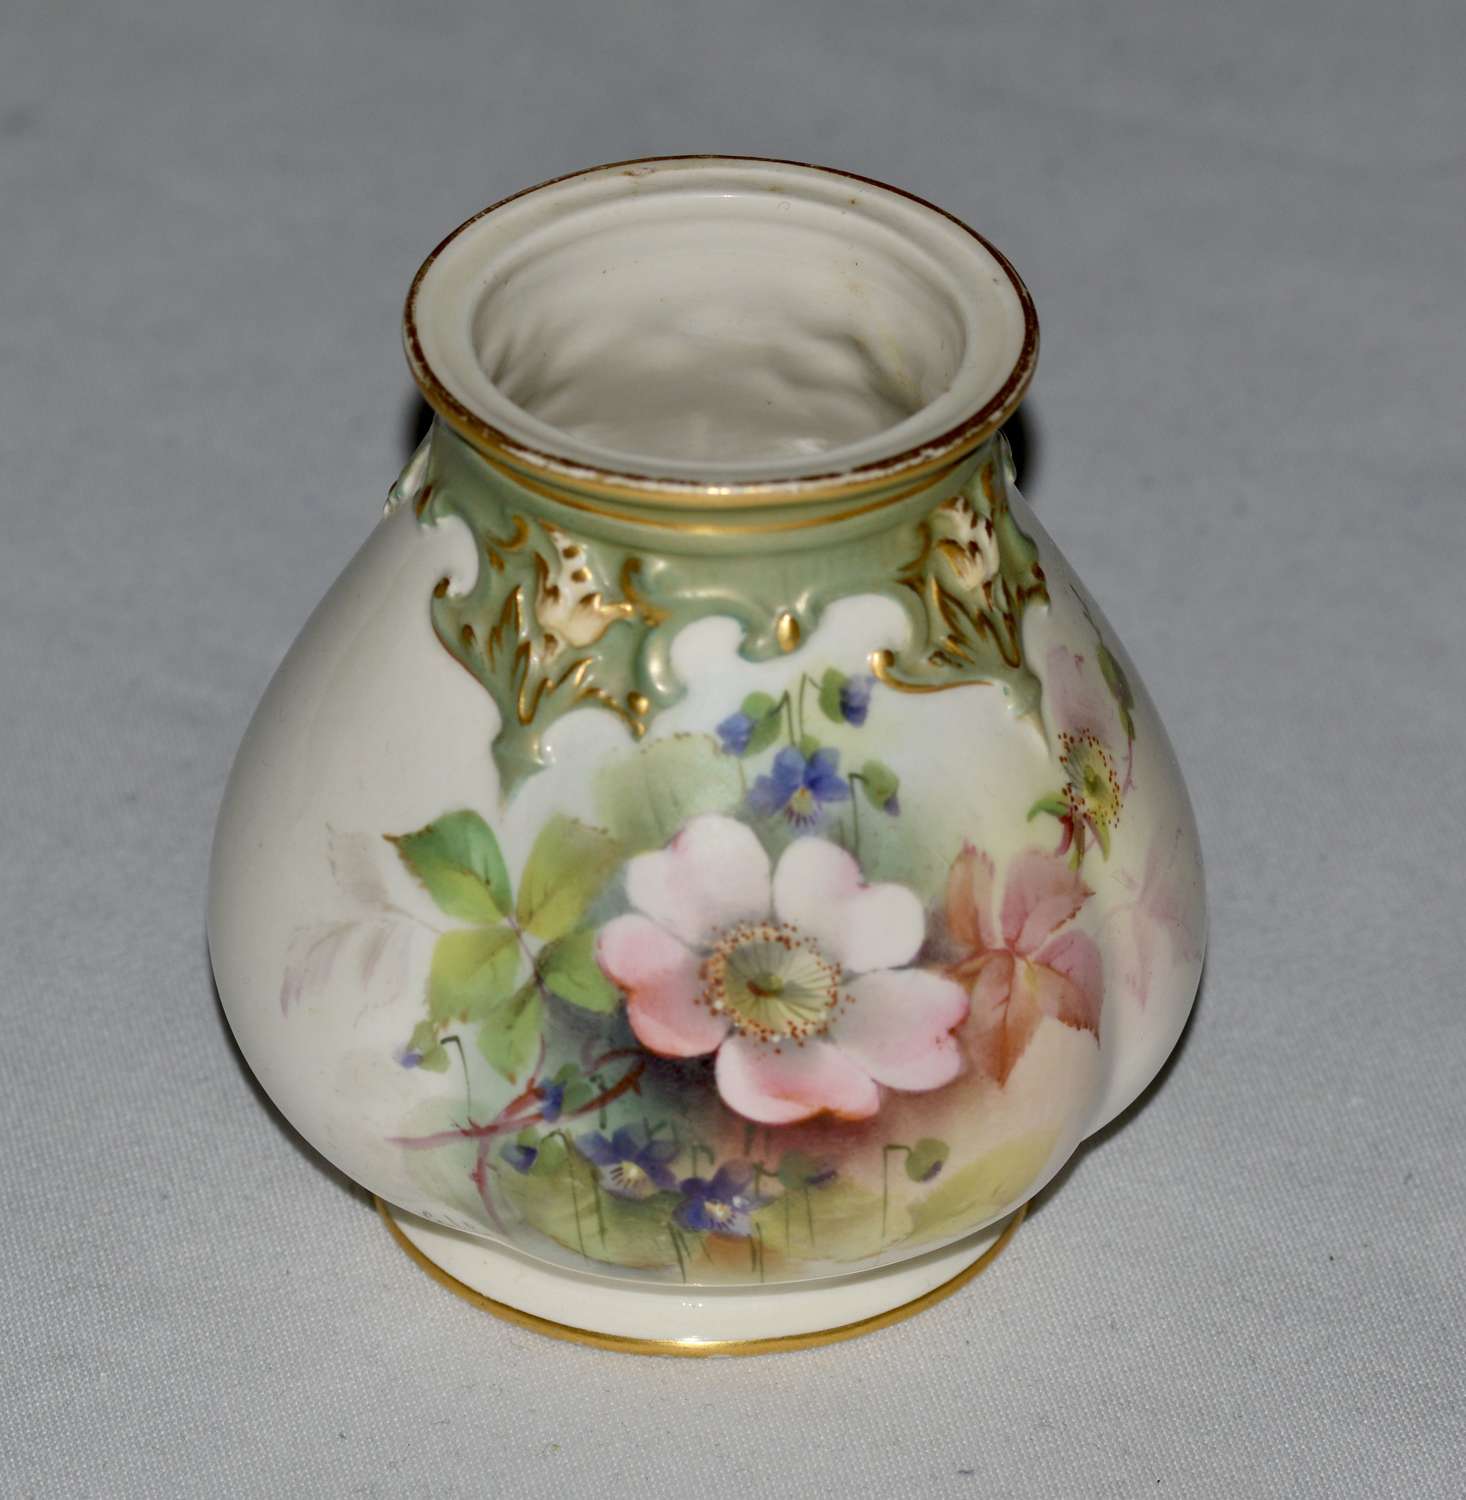 1908 - Royal Worcester - Hand Painted Ovoid Shaped Small Vase - Cole